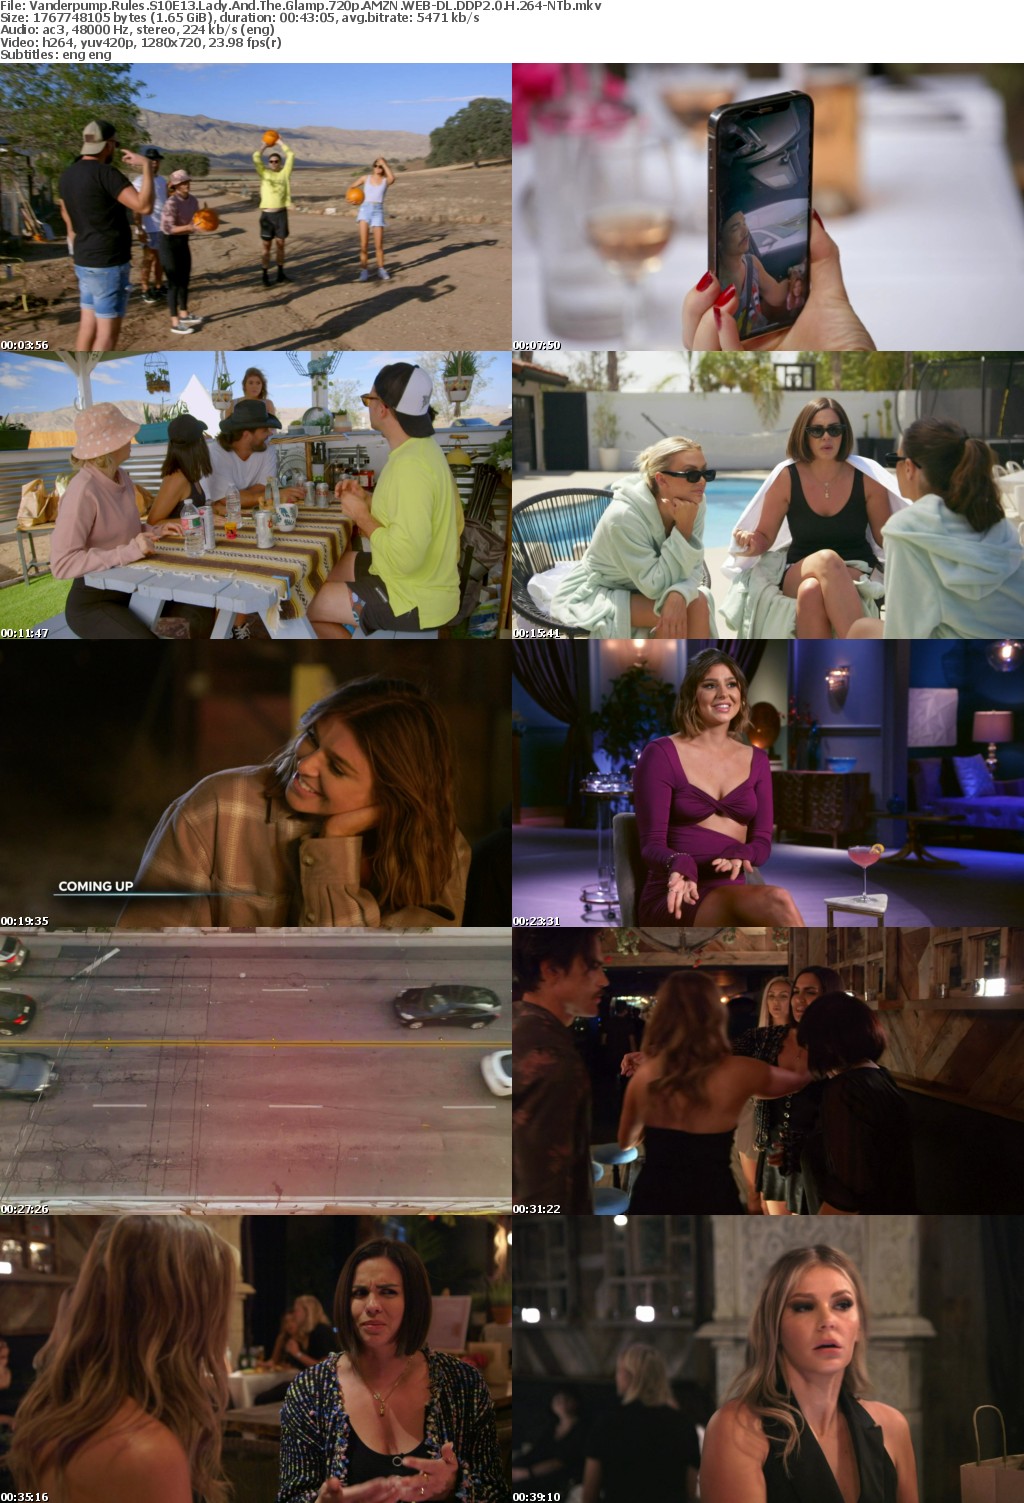 Vanderpump Rules S10E13 Lady And The Glamp 720p AMZN WEB-DL DDP2 0 H 264-NTb